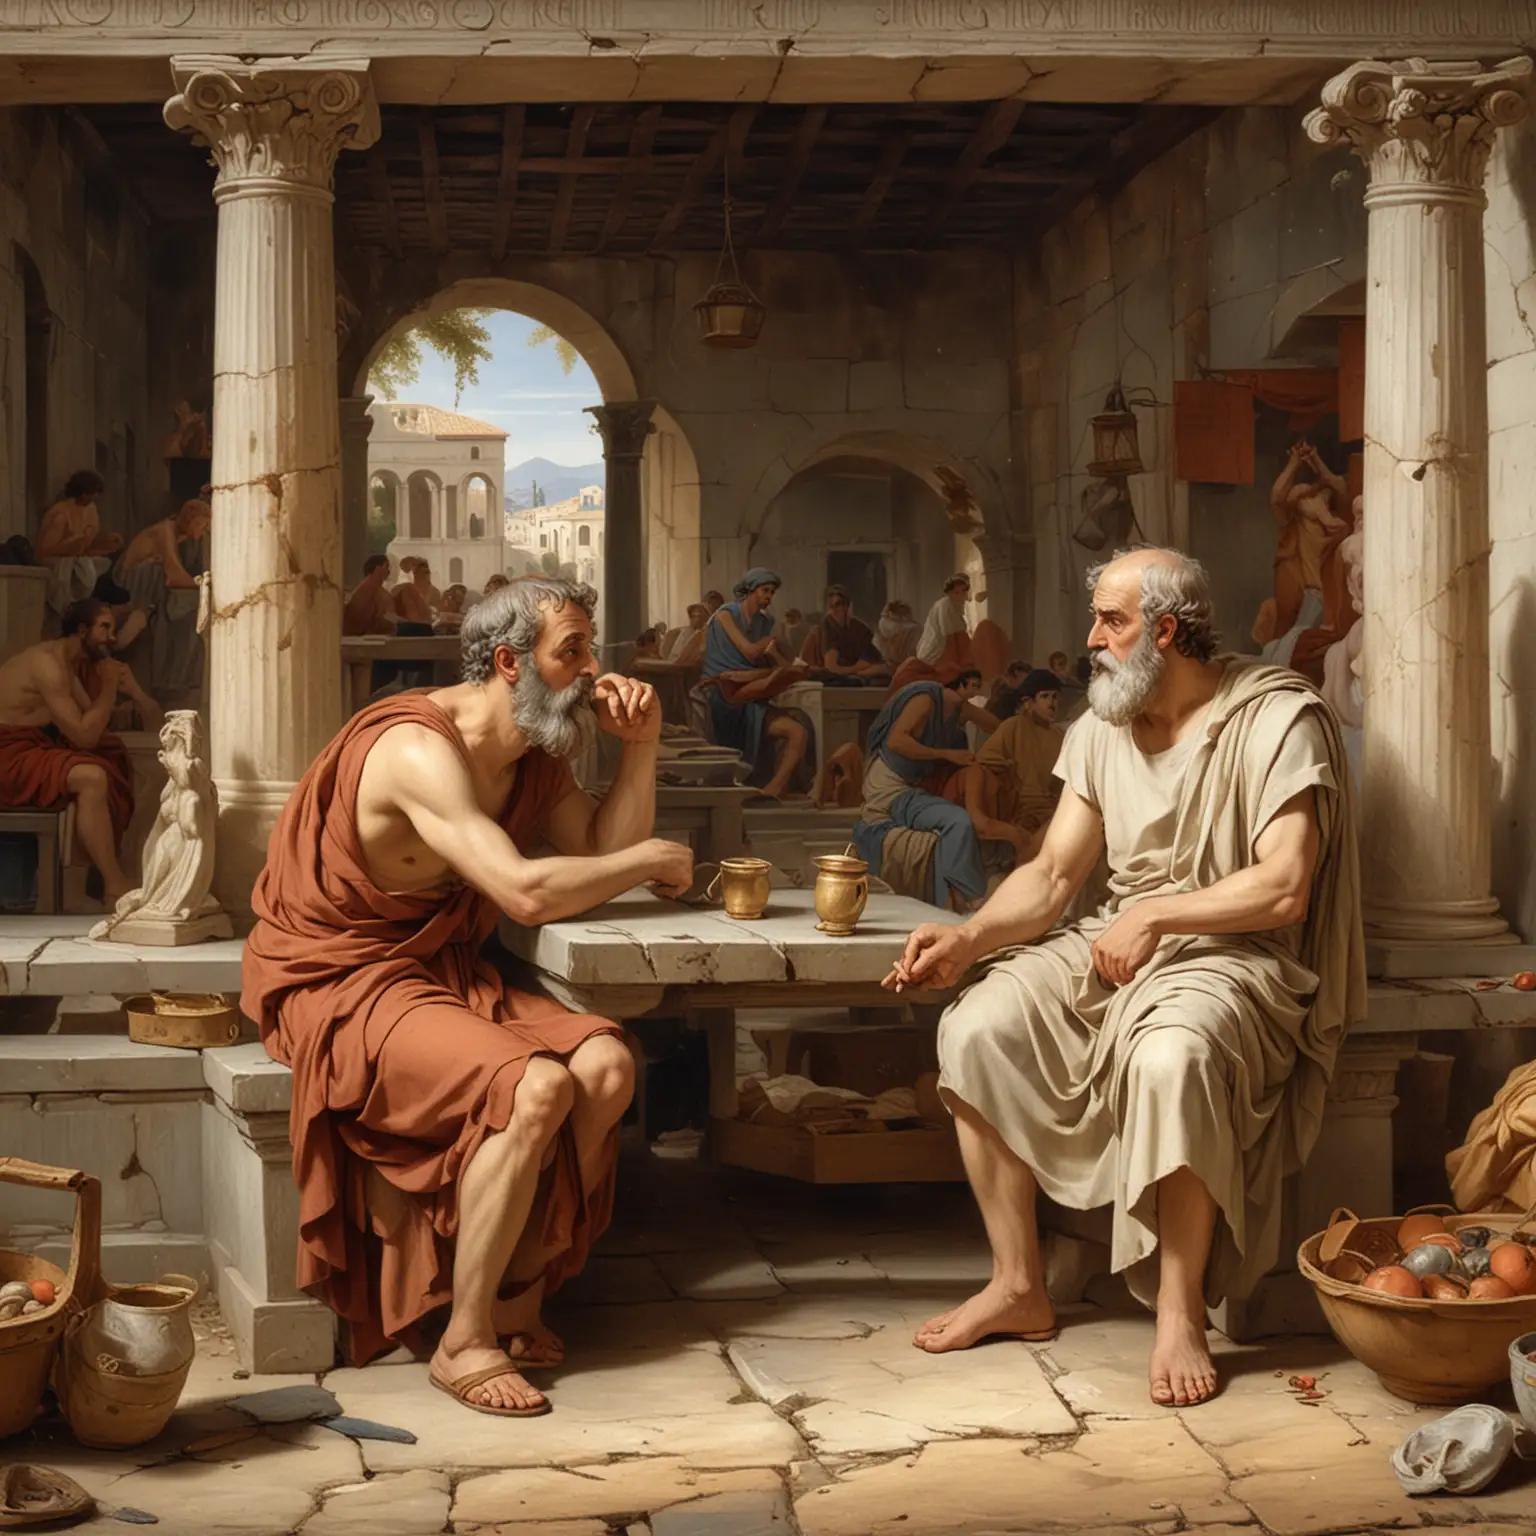 Plato-and-Aristotle-Discussing-Philosophy-in-Ancient-Greek-Marketplace